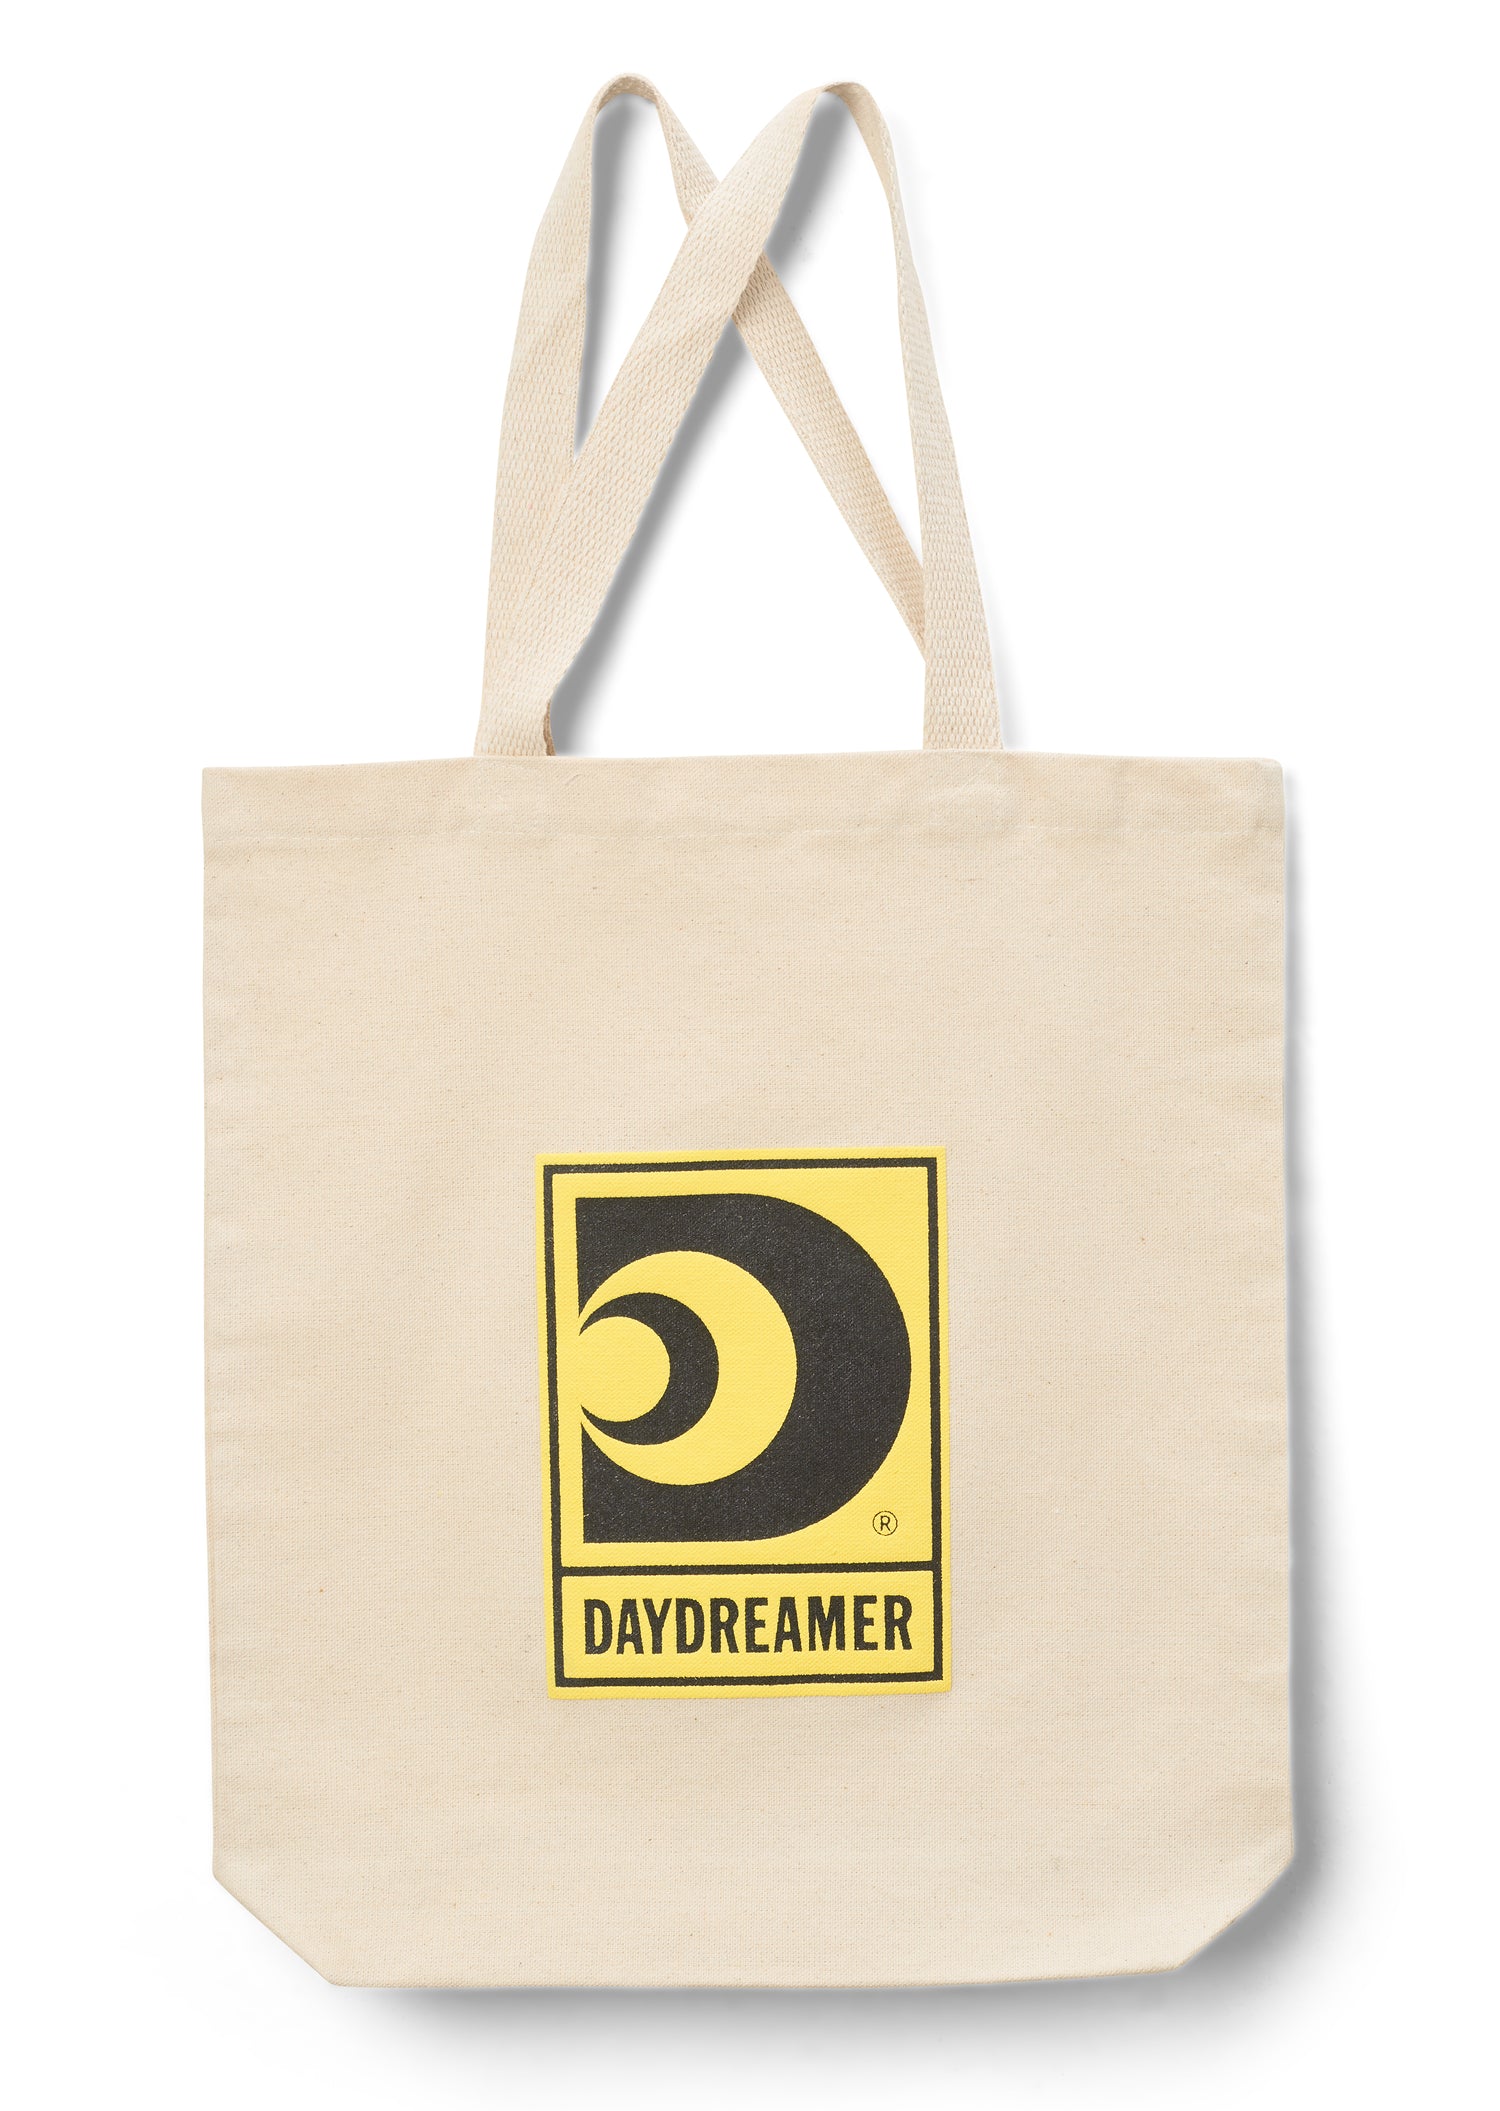 CANVAS TOTE WITH YELLOW DAYDREAMER LOGO IN CENTER